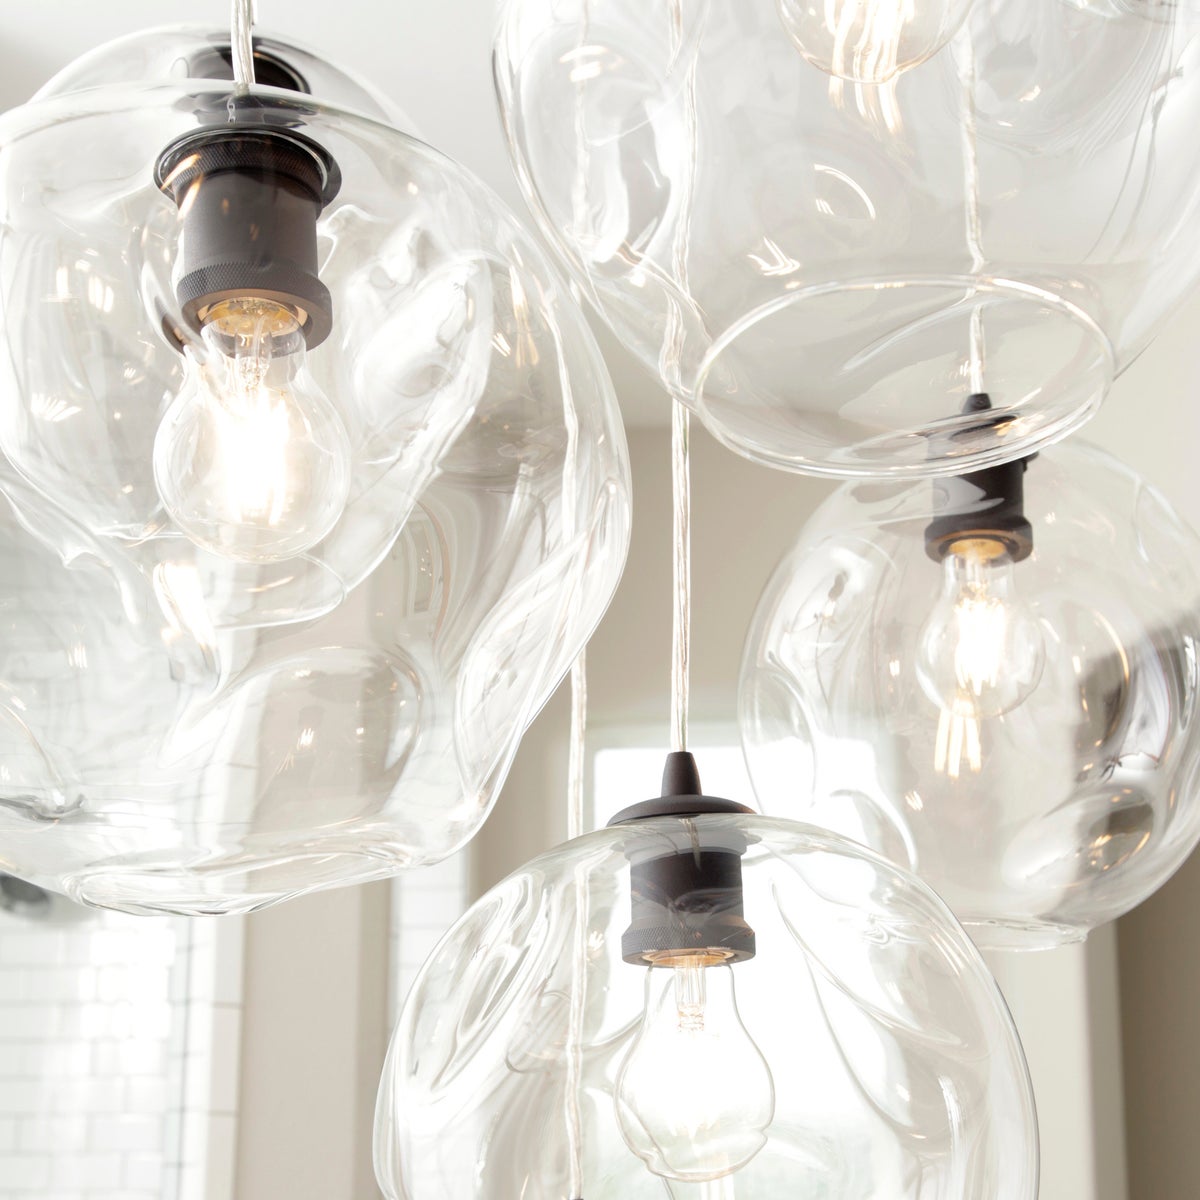 Cluster Pendant Light with clear glass lights and a close-up of a light bulb in a stylish metal fixture. Adjustable cord suspends the pendant lighting from a matching canopy. Perfect for brightening your space in contemporary style.